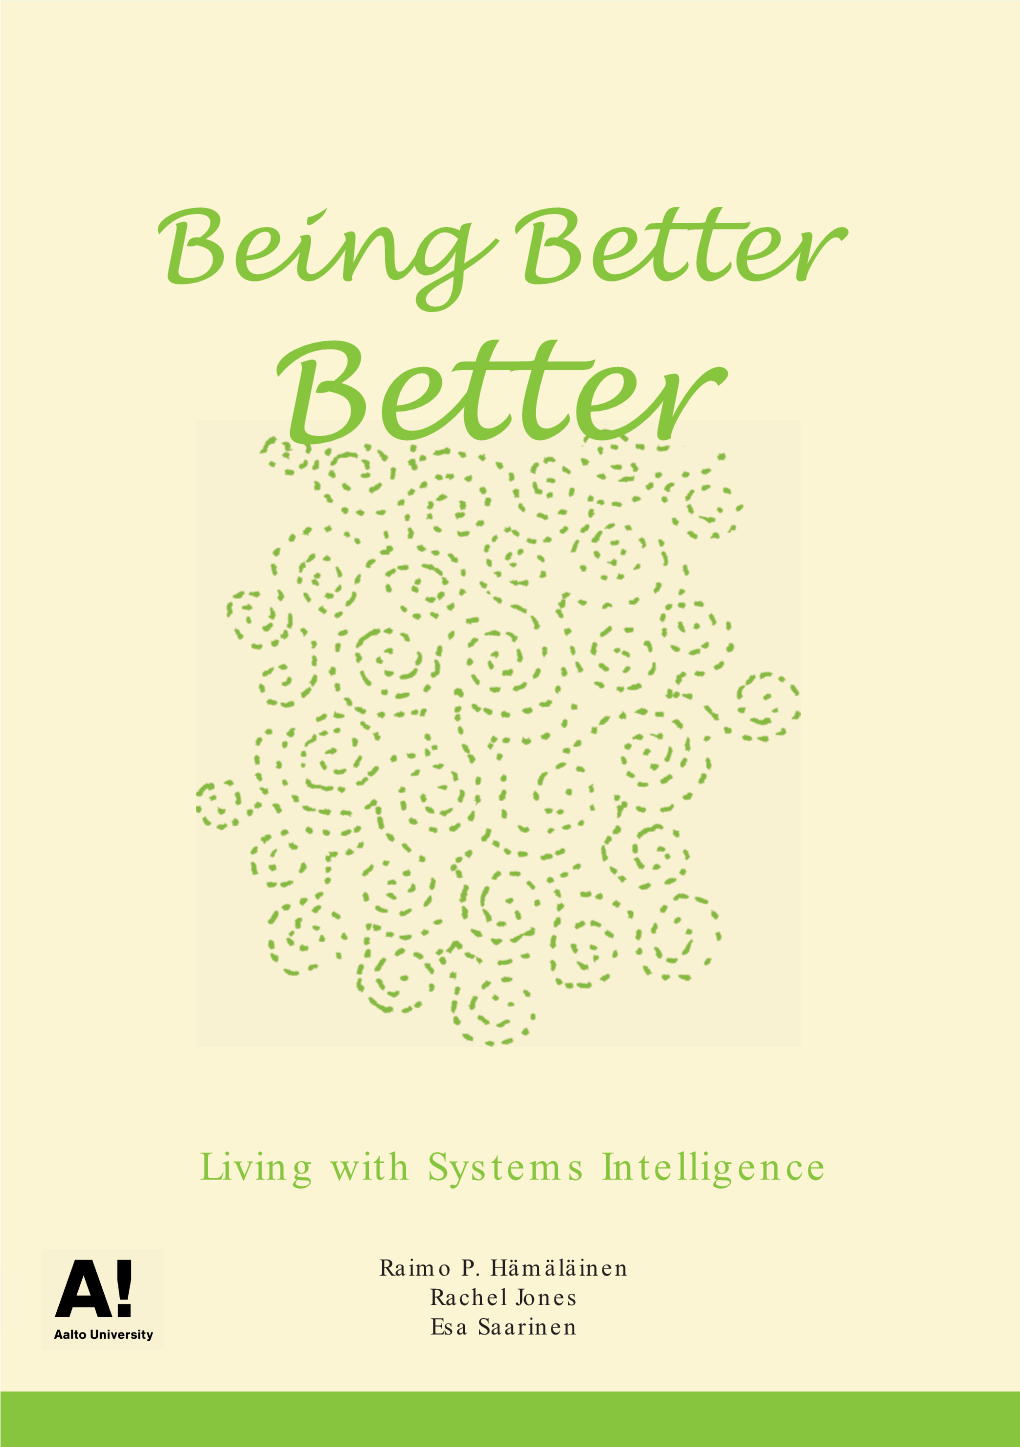 Being Better Better – Living with Systems Intelligence